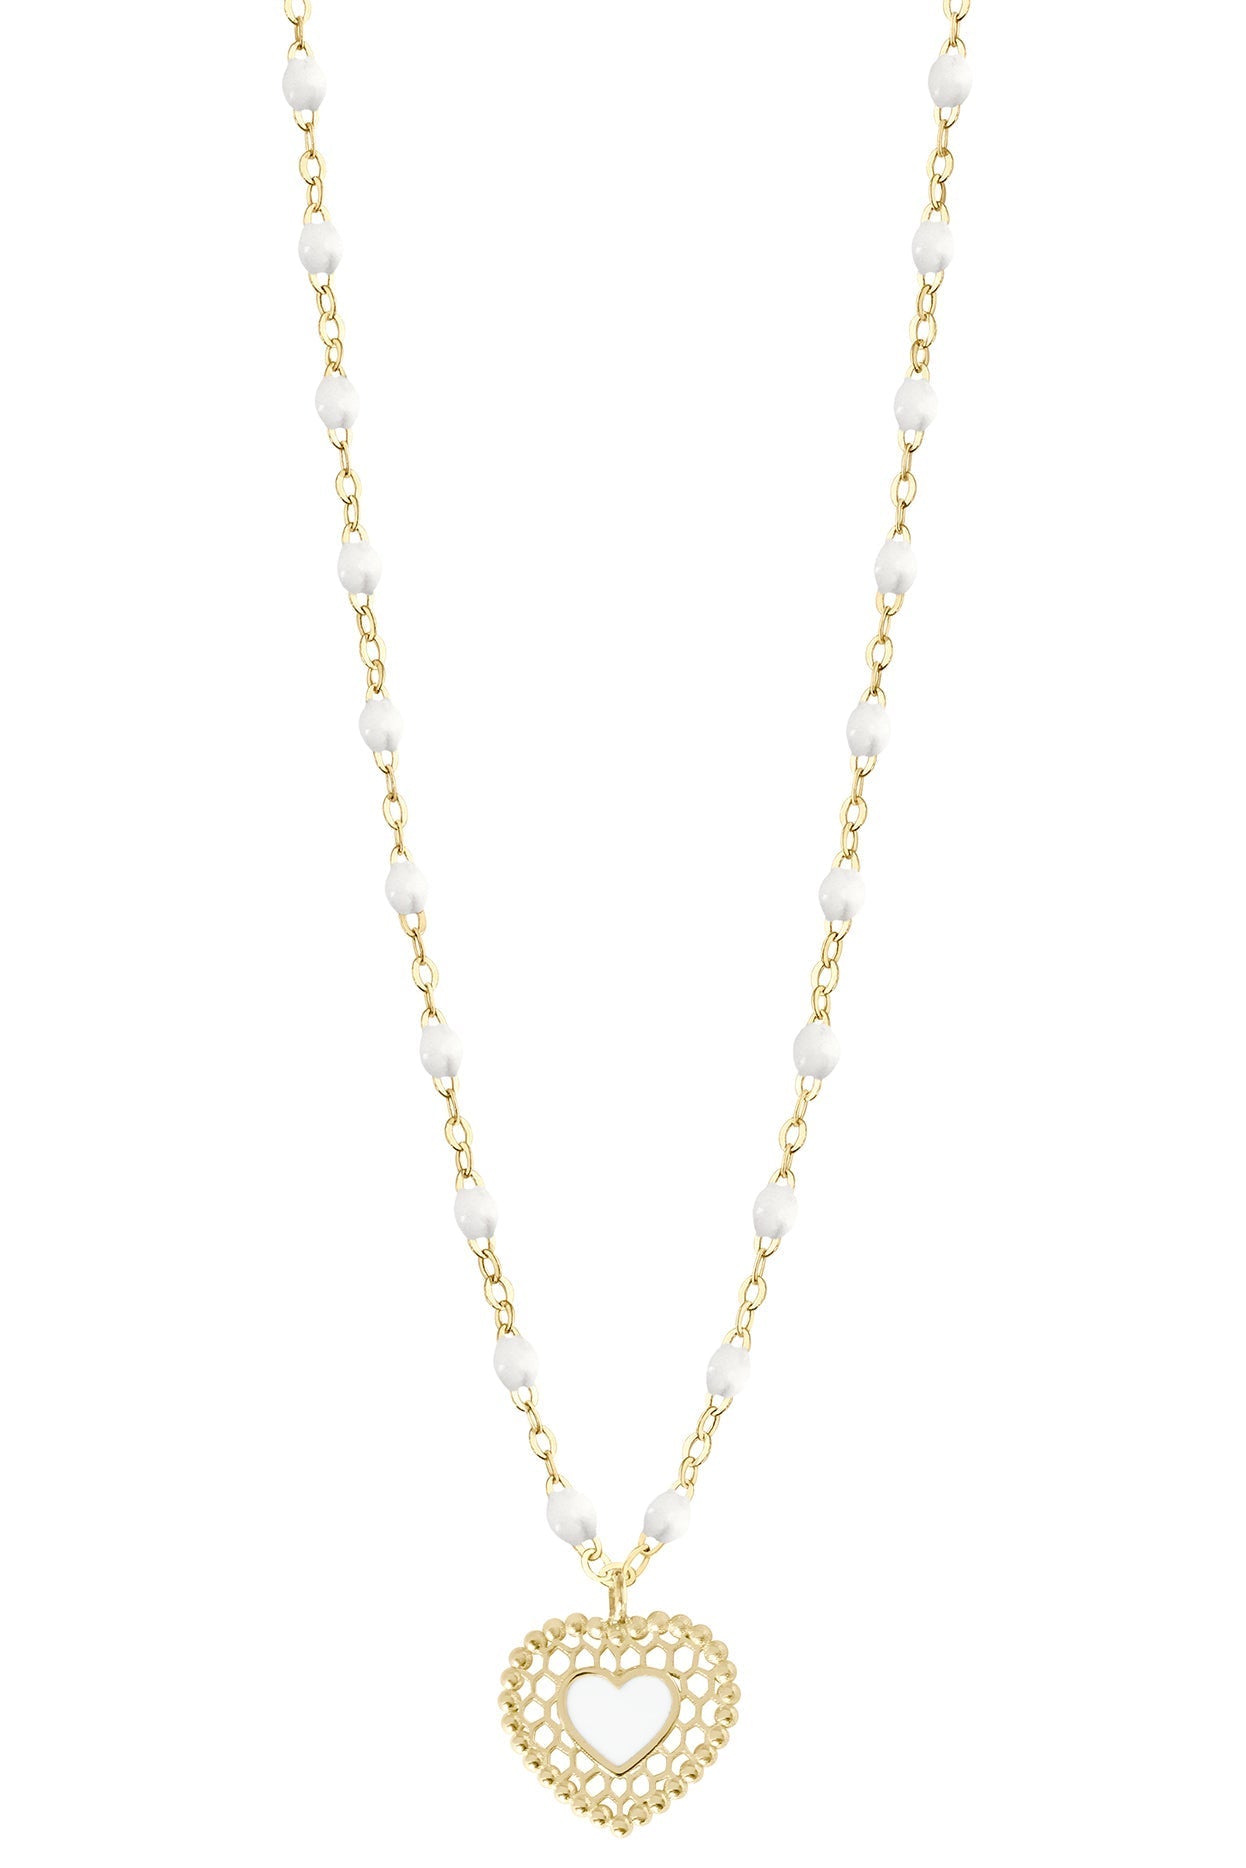 GIGI CLOZEAU-Lace Heart Necklace - 16.5in - White-WHITE/YELLOW GOLD